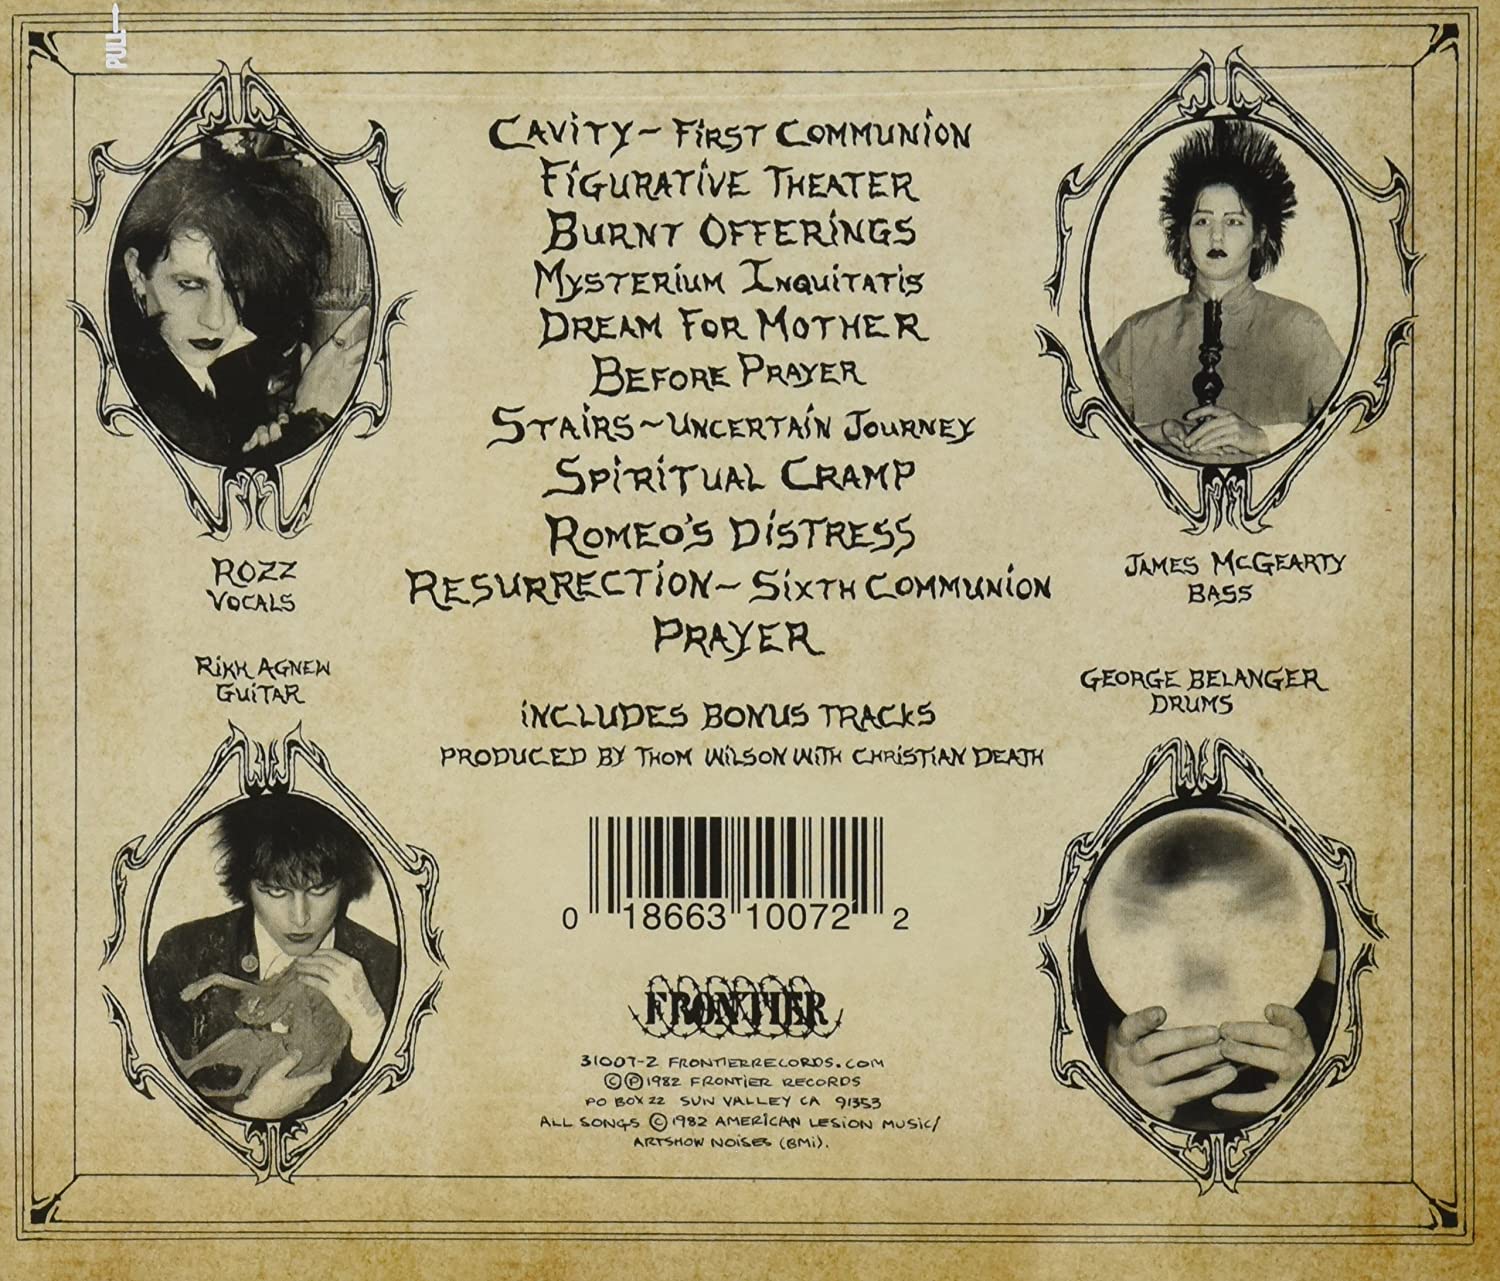 Album artwork for Christian Death's Only Theatre of Pain showing the 4 band members and the tracklisting.